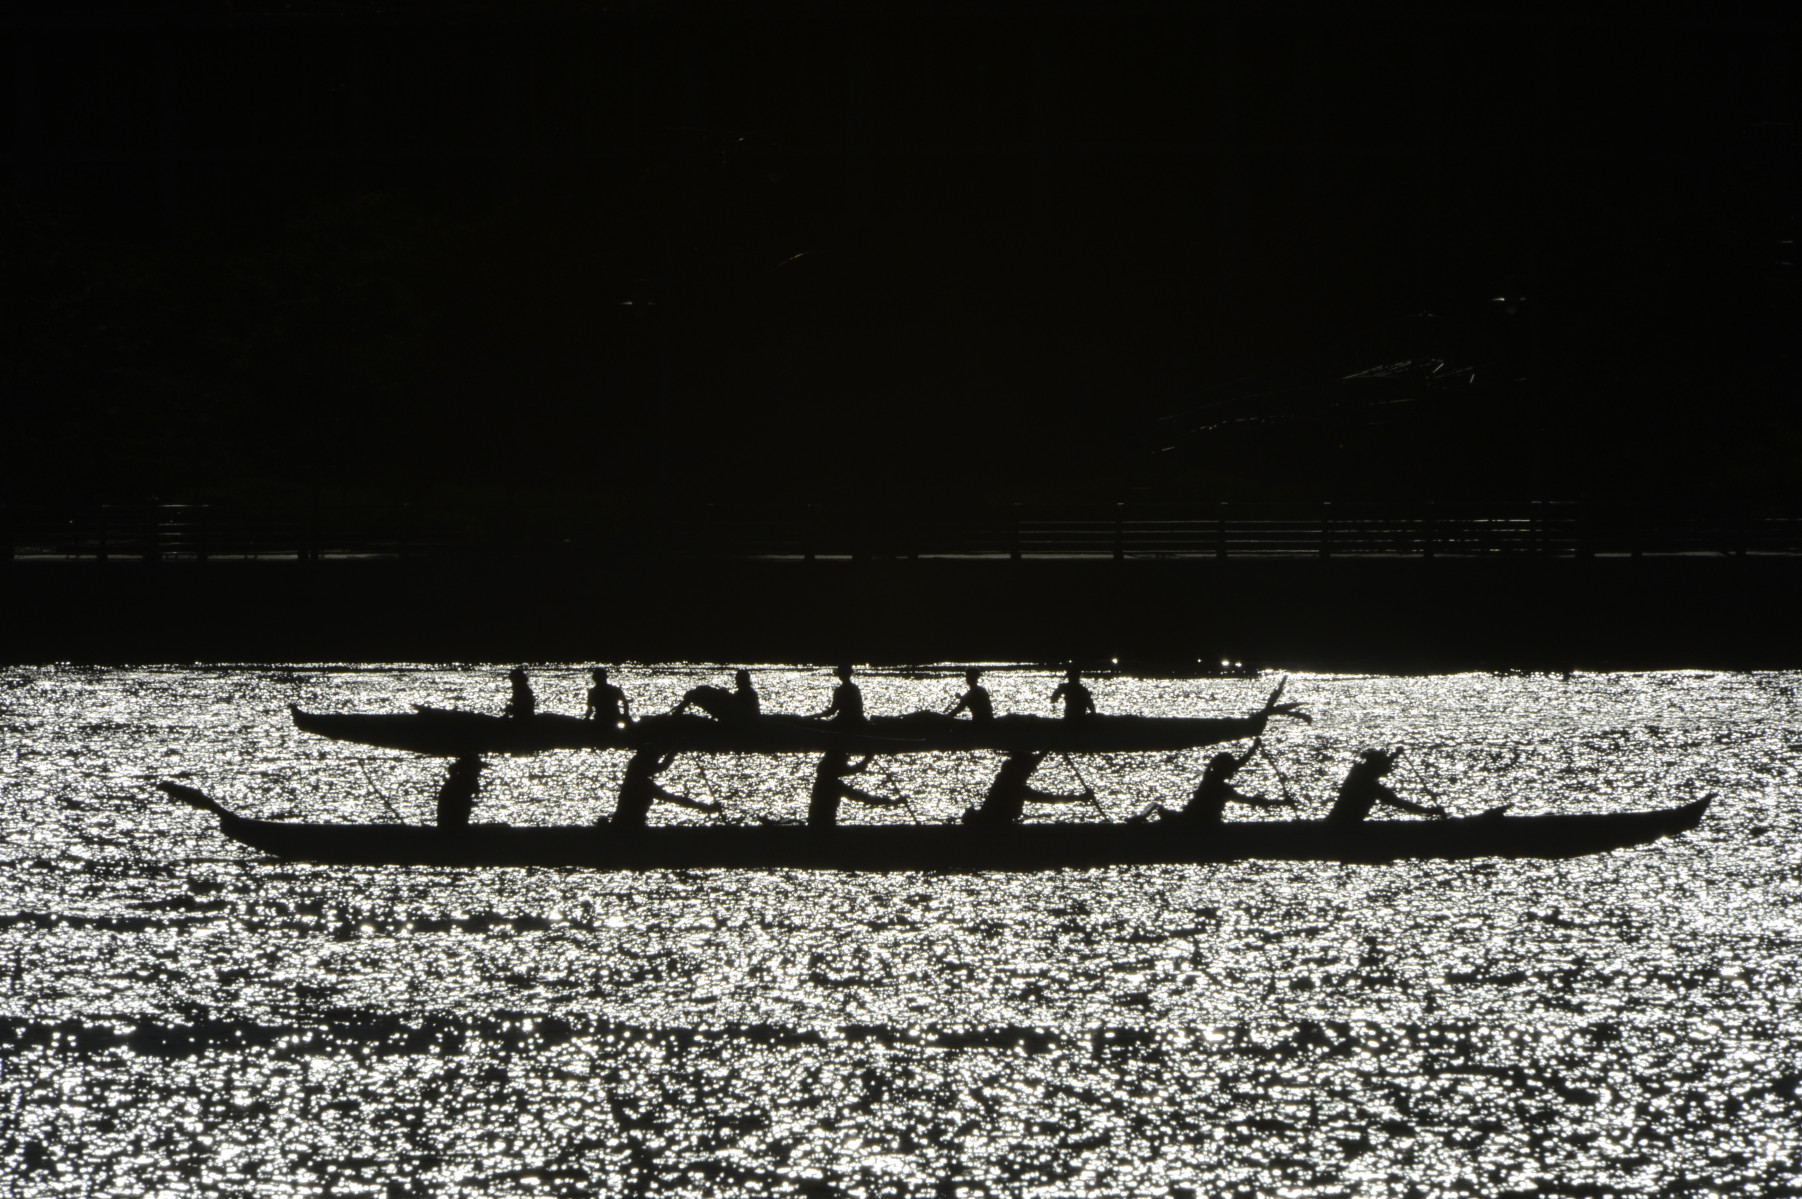 <h4 style="text-transform:uppercase">Outrigger Canoes</h4>
<div class="captiontext">

</div>



Outrigger canoes : Limited Editions : Photography by Adam Stoltman: Sports Photography, The Arts, Portraiture, Travel, Photojournalism and Fine Art in New York